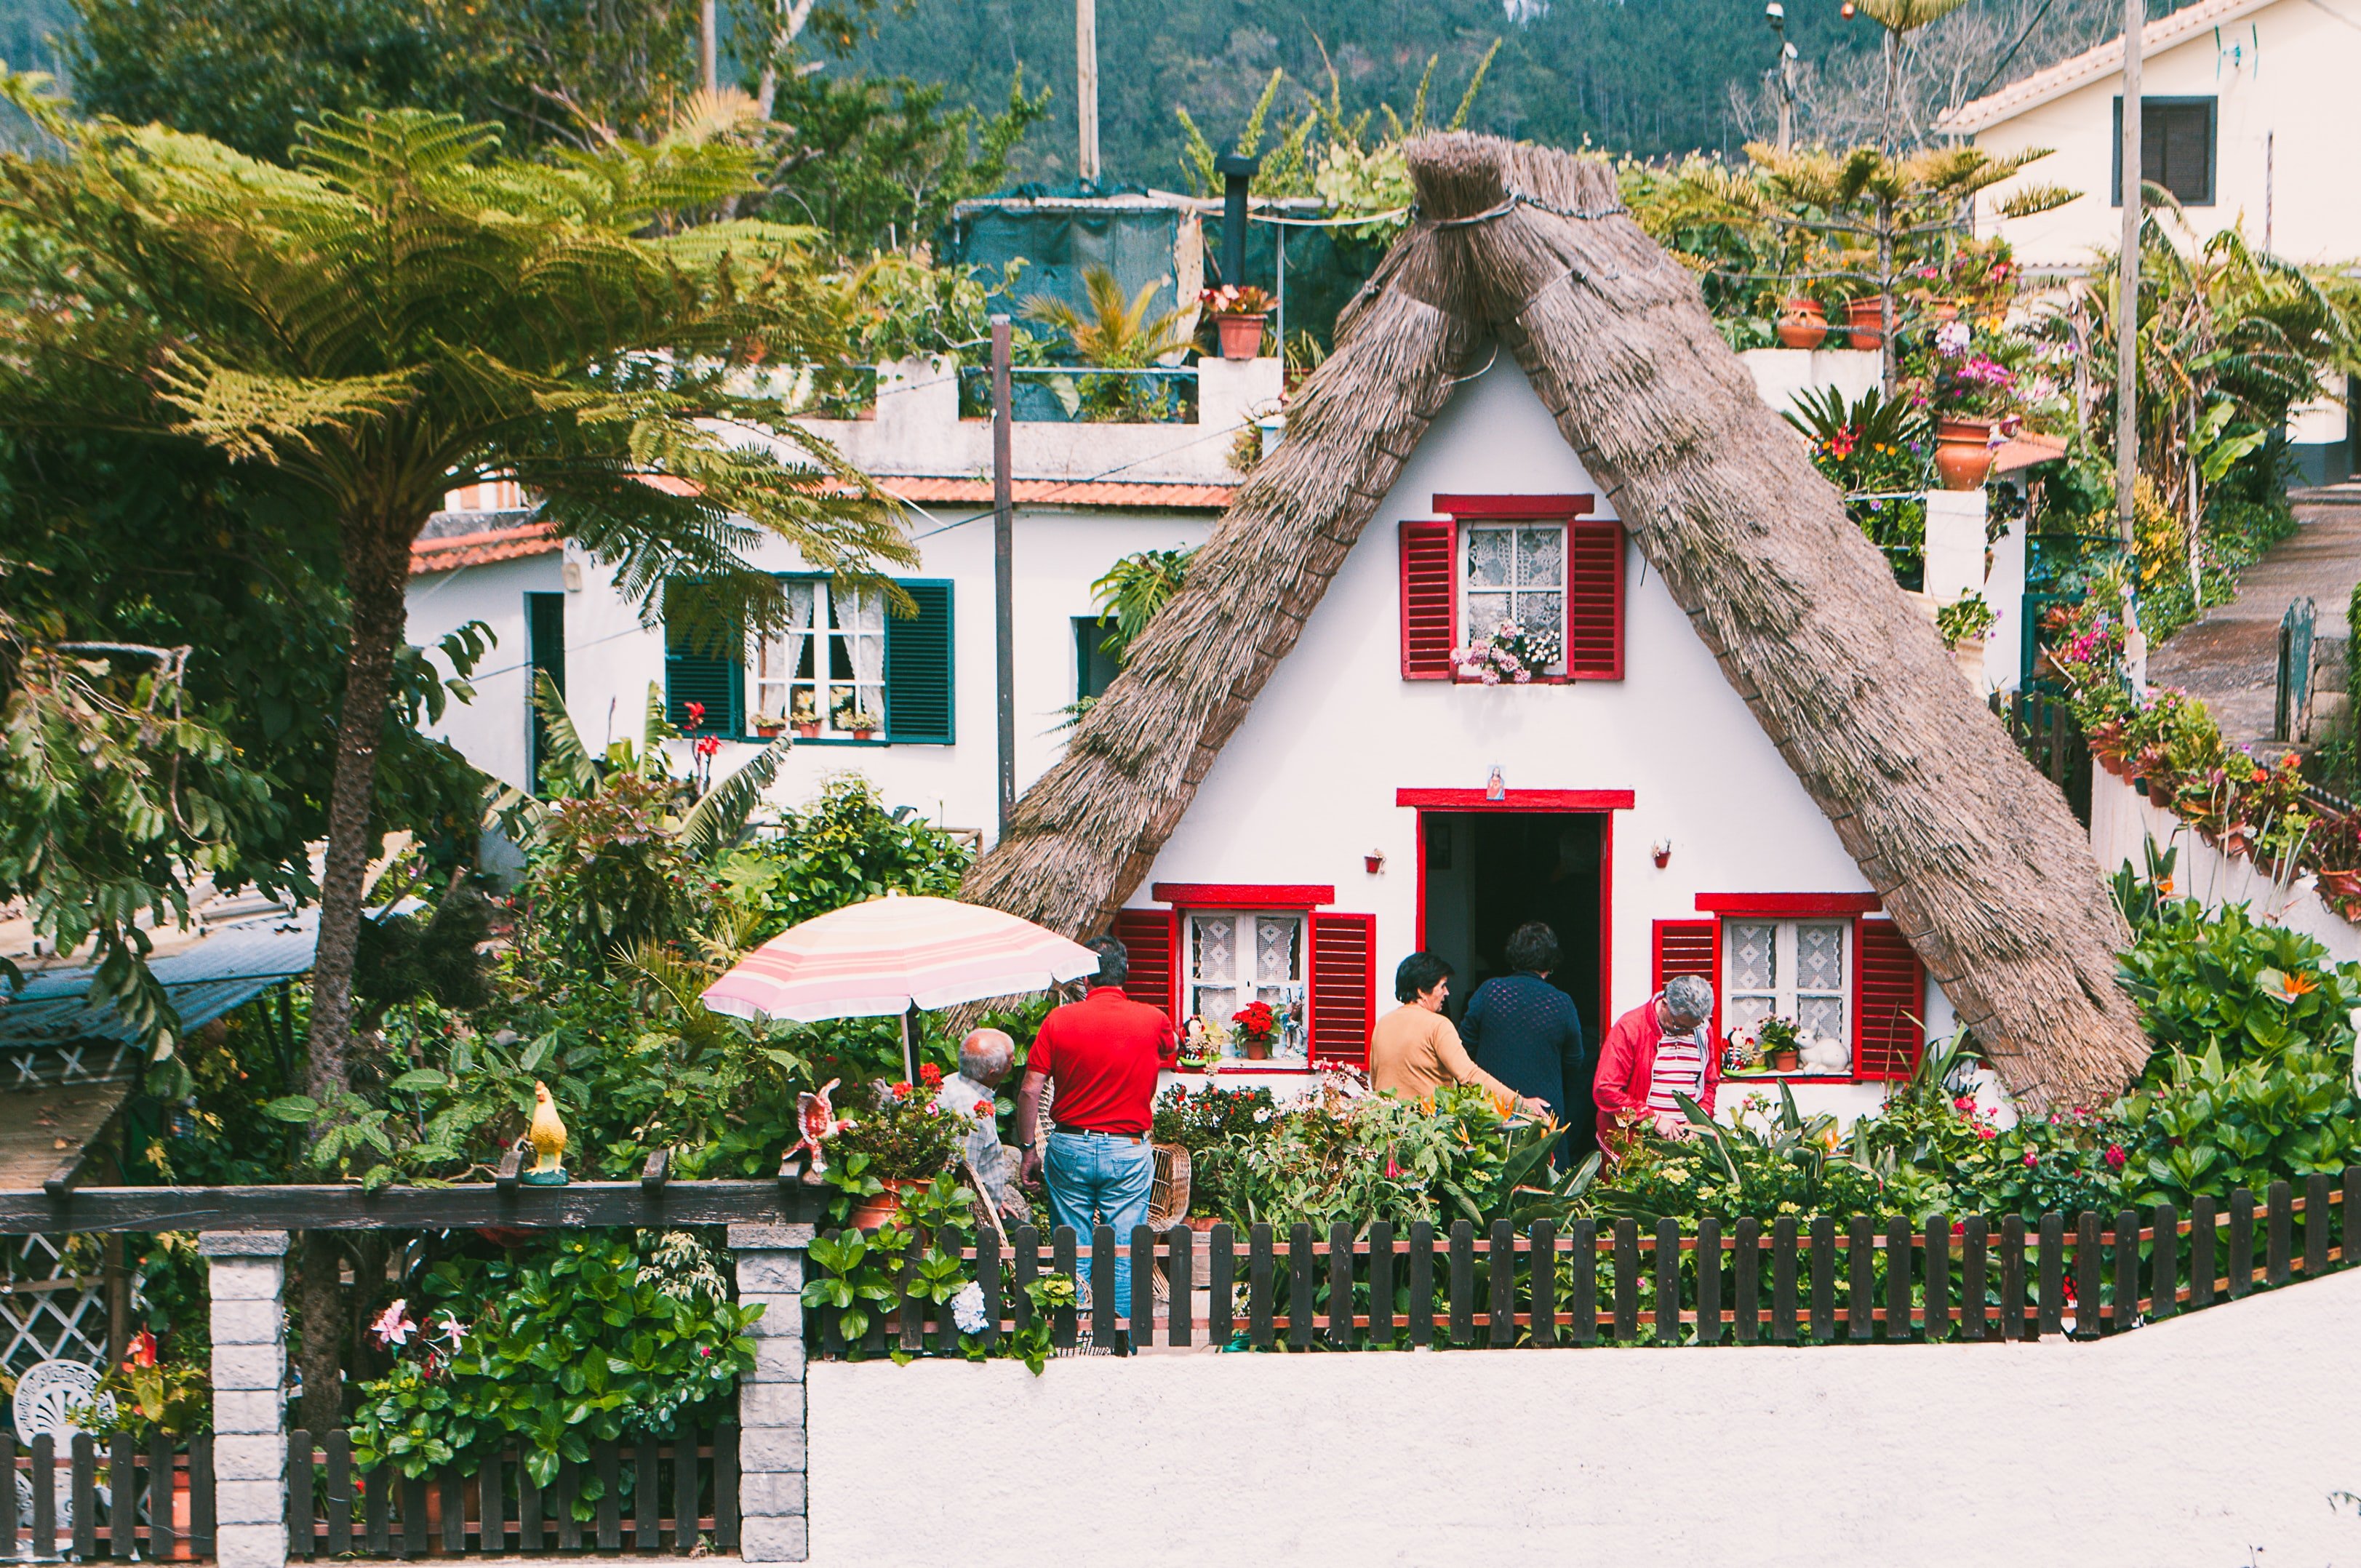 An extraordinary house with red windows and thatched roof surrounded by flowers.